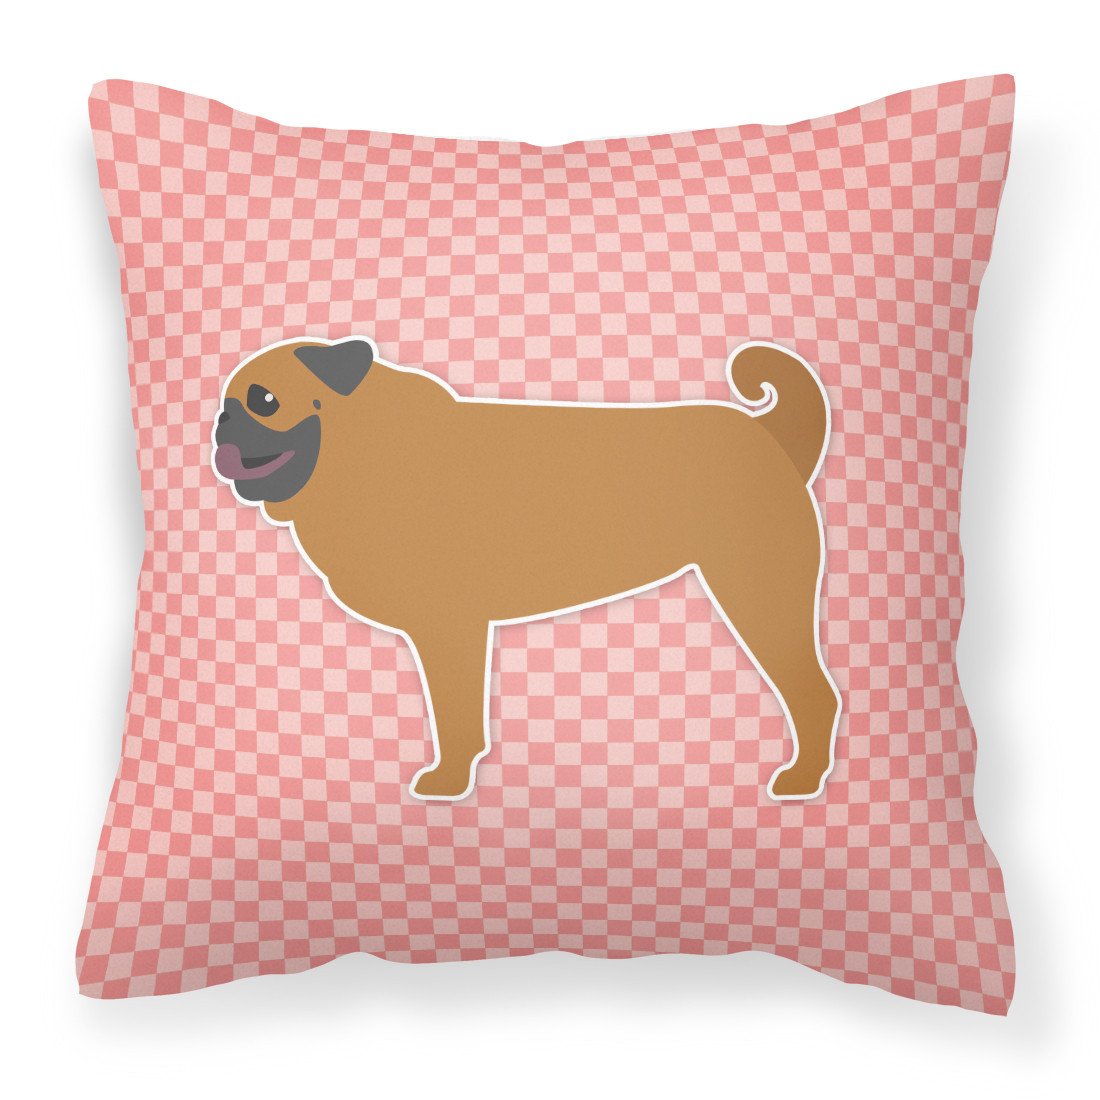 Pug Checkerboard Pink Fabric Decorative Pillow BB3647PW1818 by Caroline's Treasures